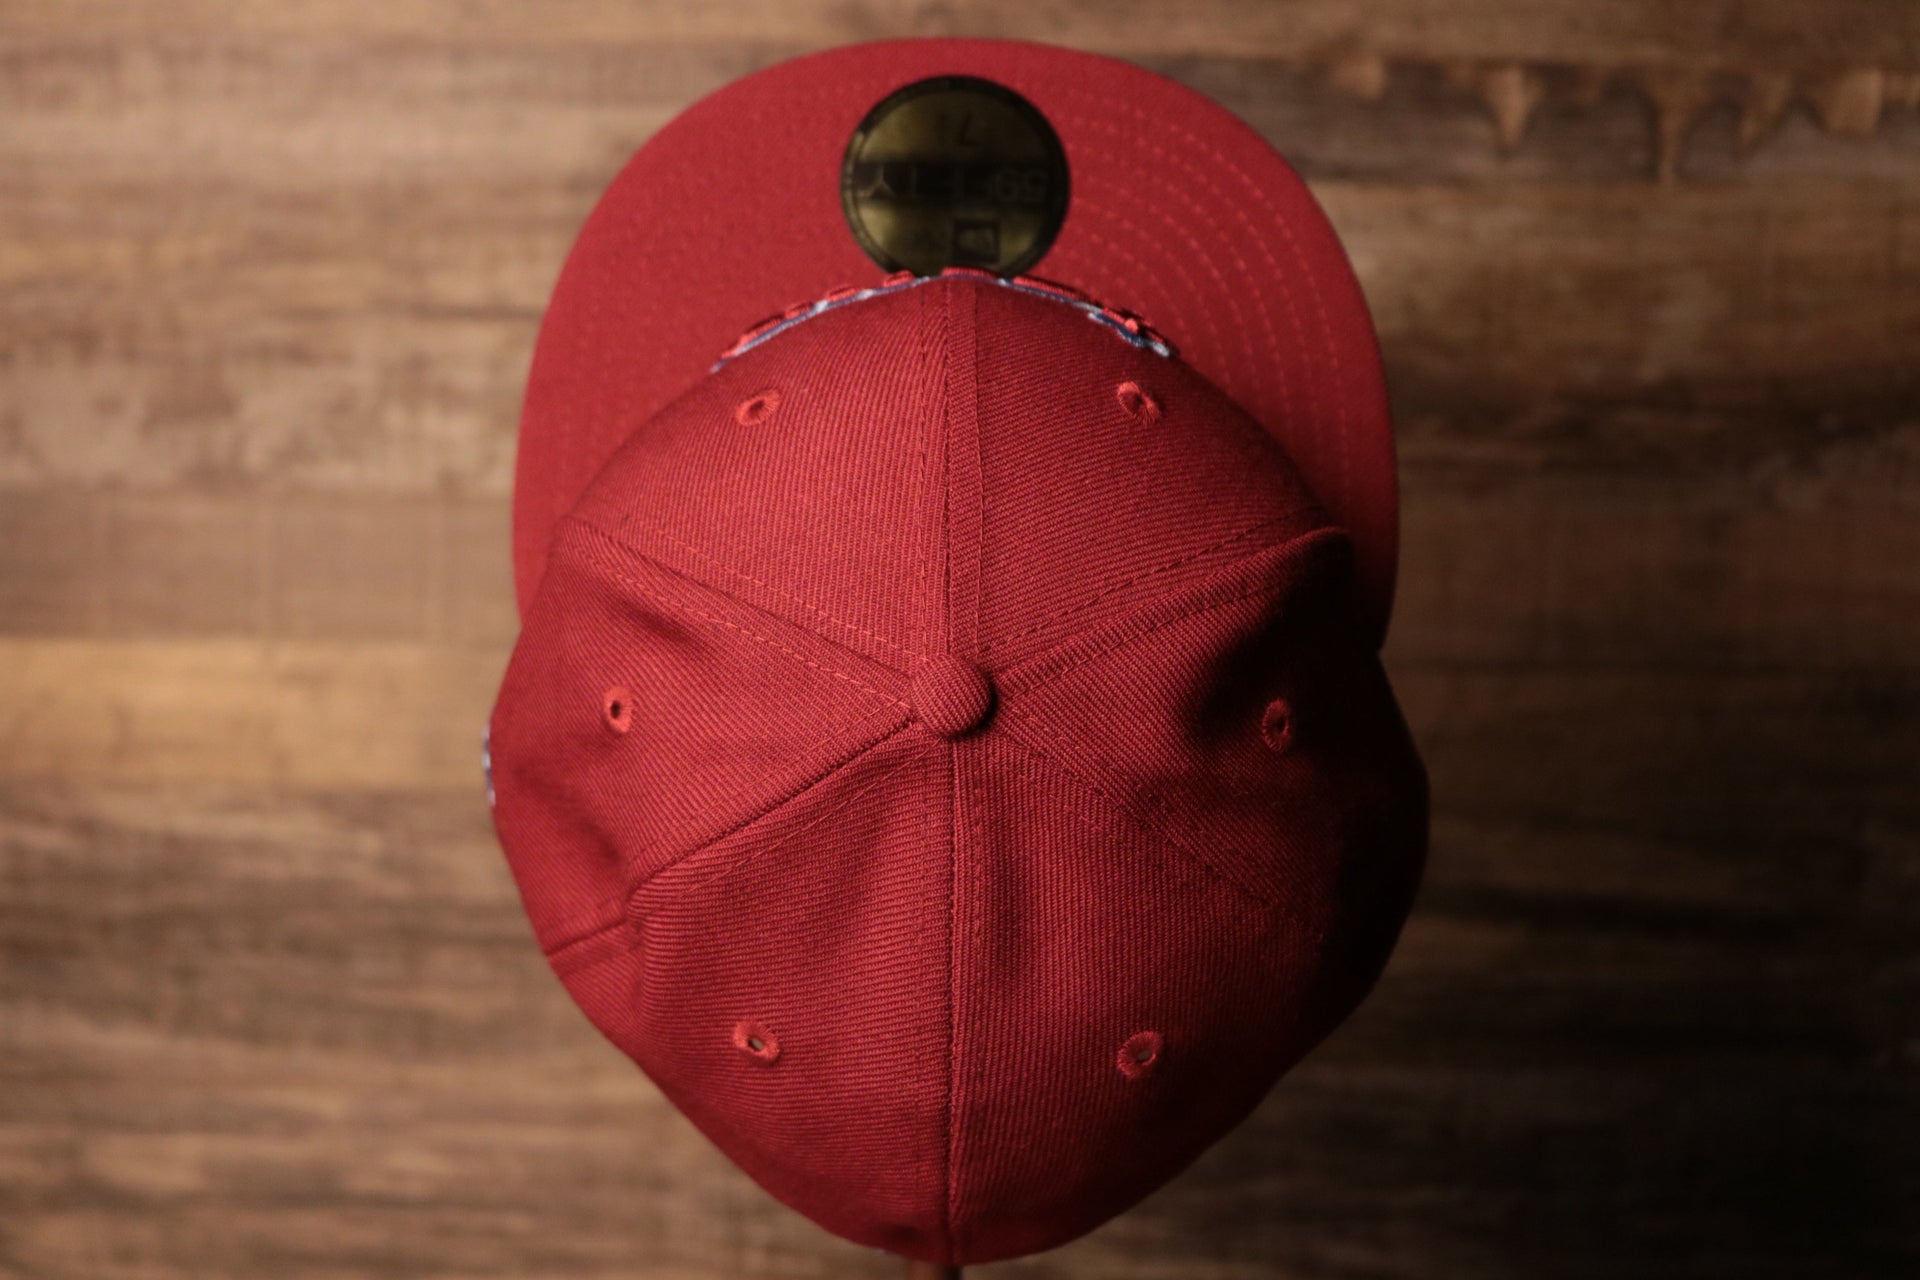 Grey Bottom Fitted Cap | Jawn Burgundy Gray Bottom Fitted Hat the top of this cap is plain burgundy